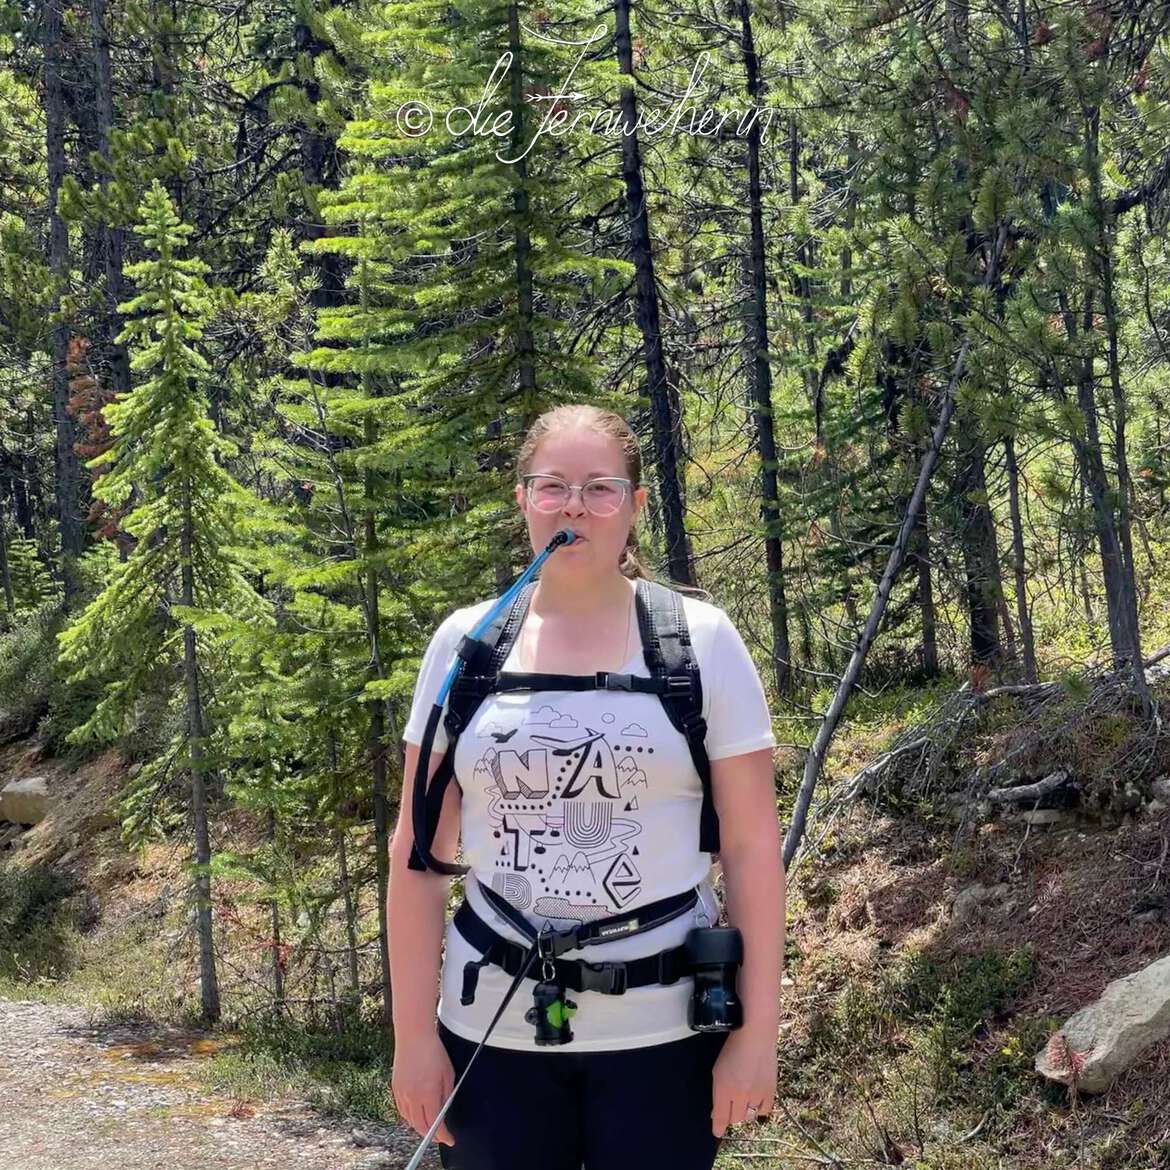 A hiker poses with her hydration backpack on a forested trail.